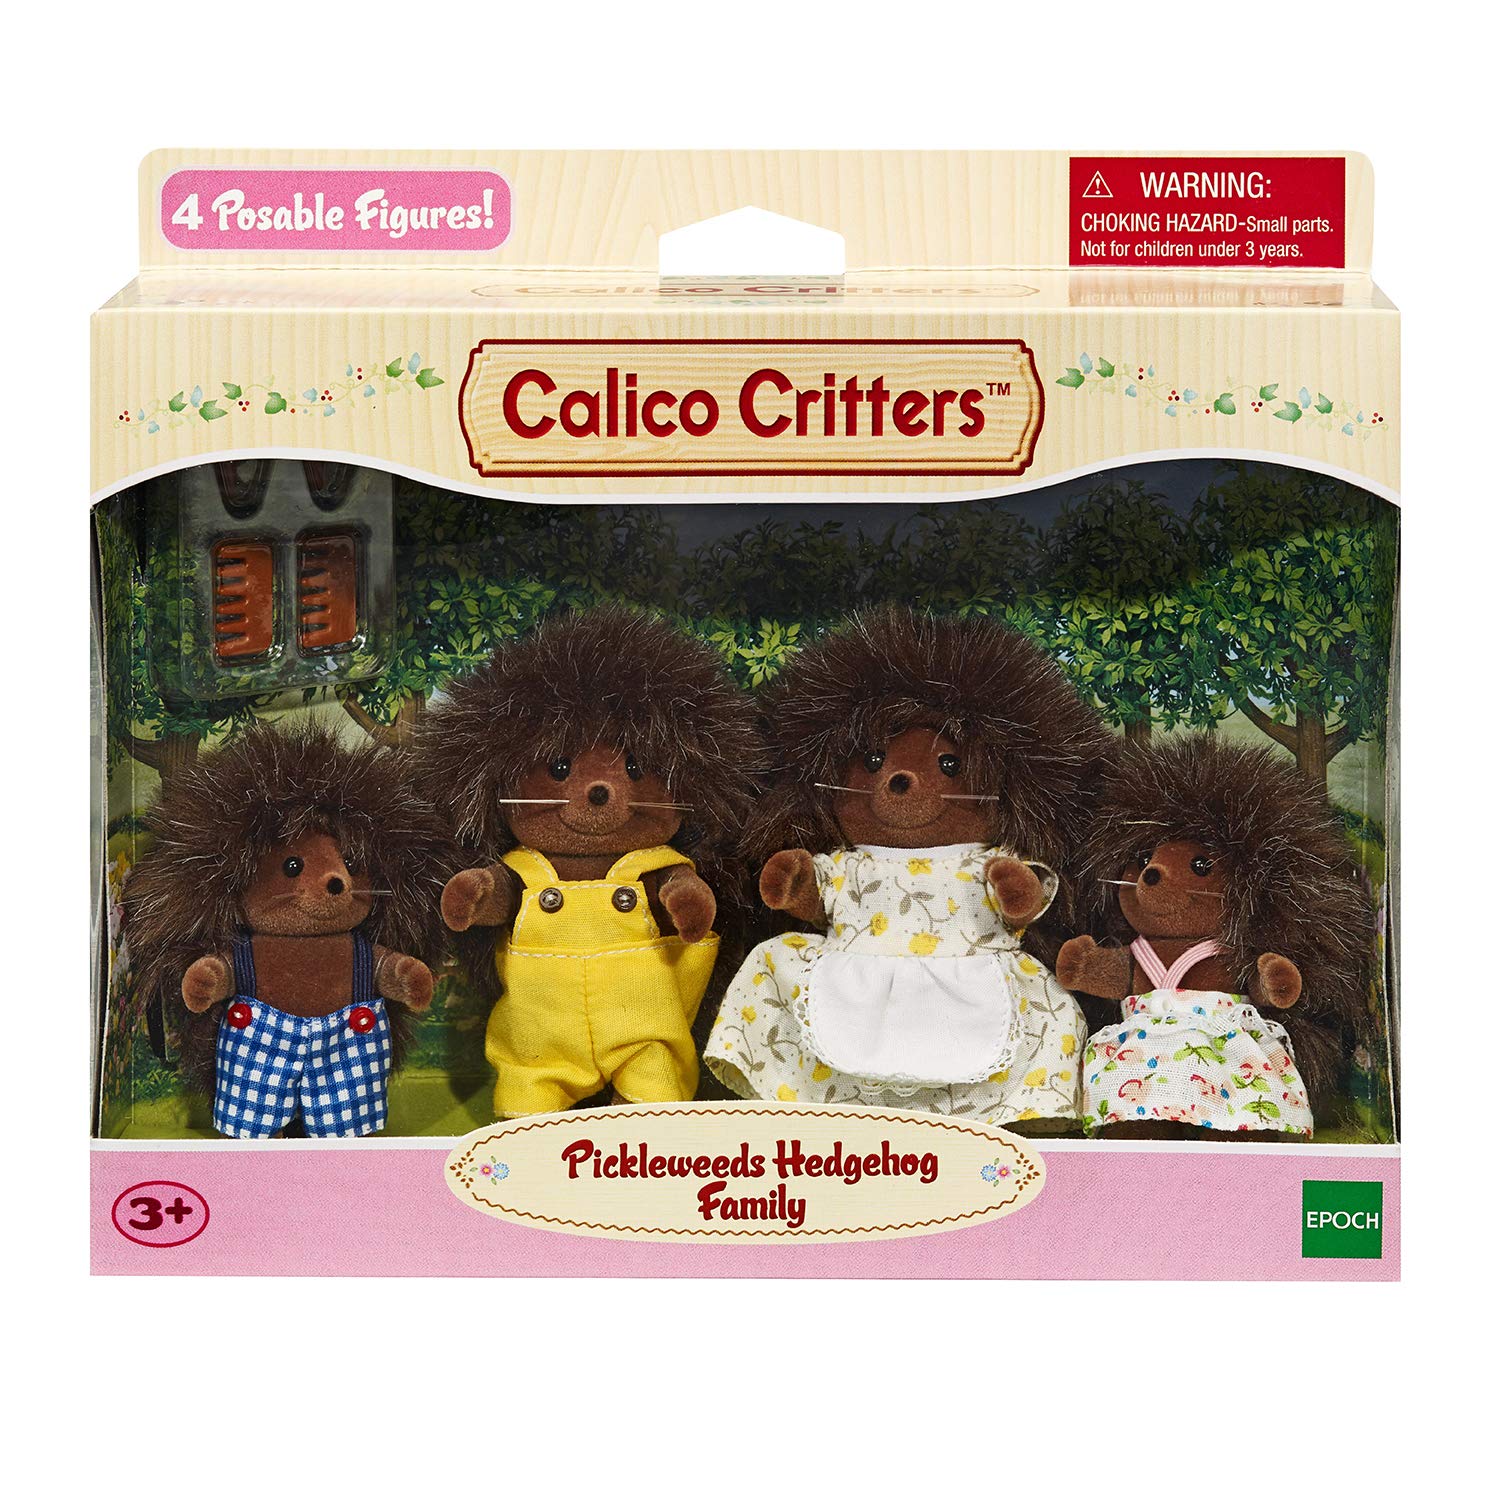 Calico Critters, Pickleweeds Hedgehog Family, Dolls, Dollhouse Figures, Collectible Toys